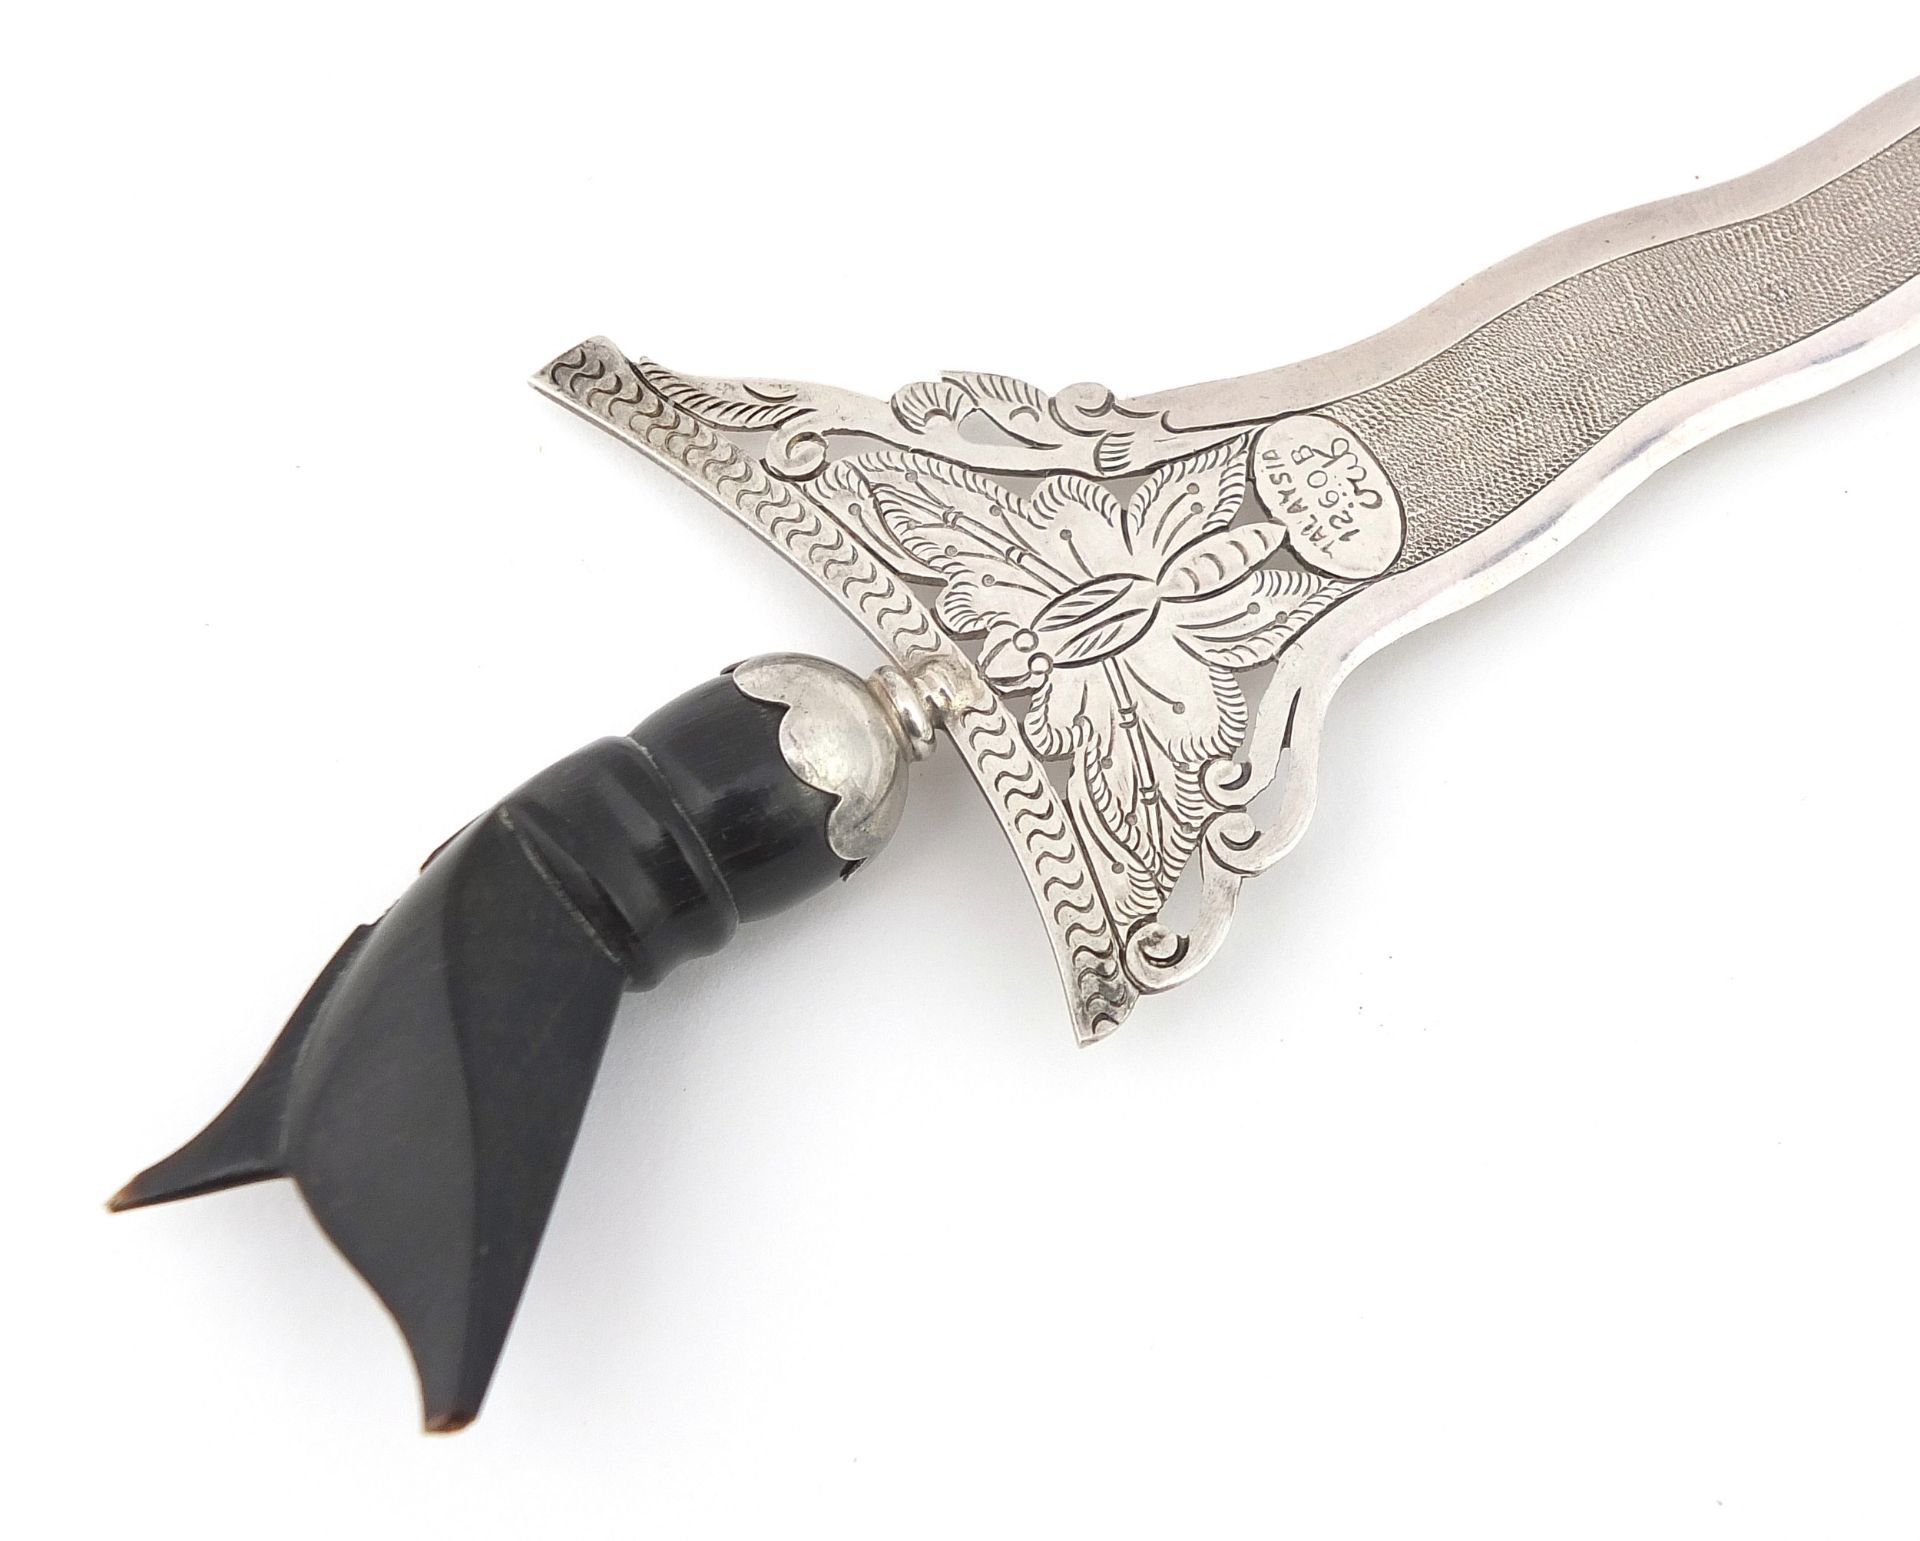 Miniature Malaysian silver Kris with ebonised handle, engraved Malaysia 1260B, 20cm in length, 27.7g - Image 4 of 5